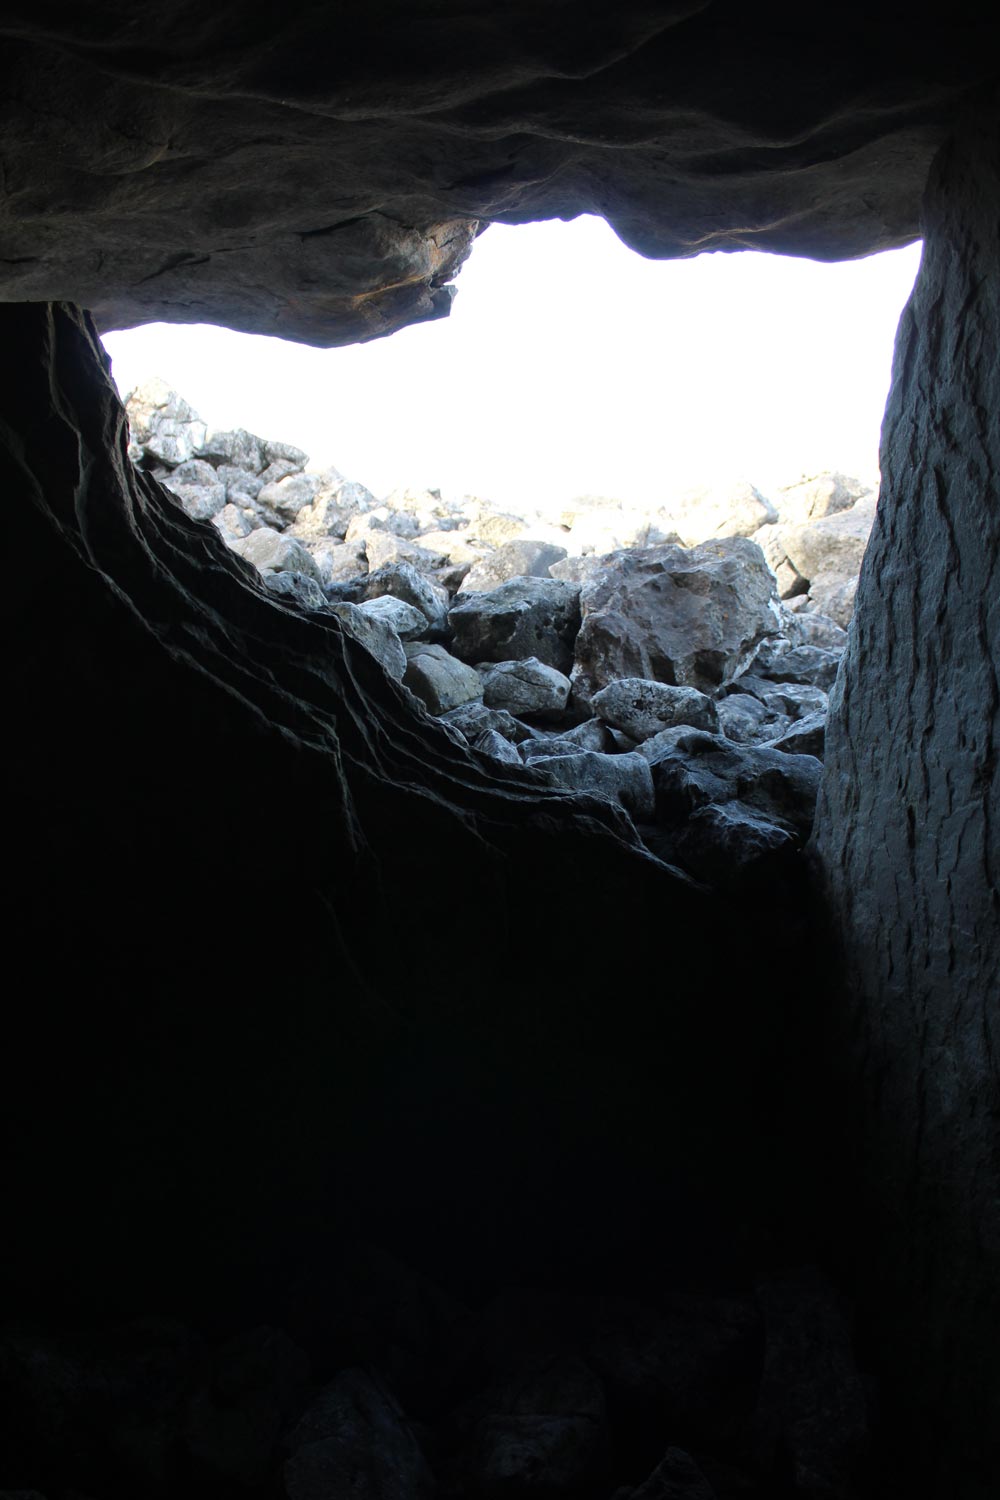 Within the chamber of Knocknashee cairn.